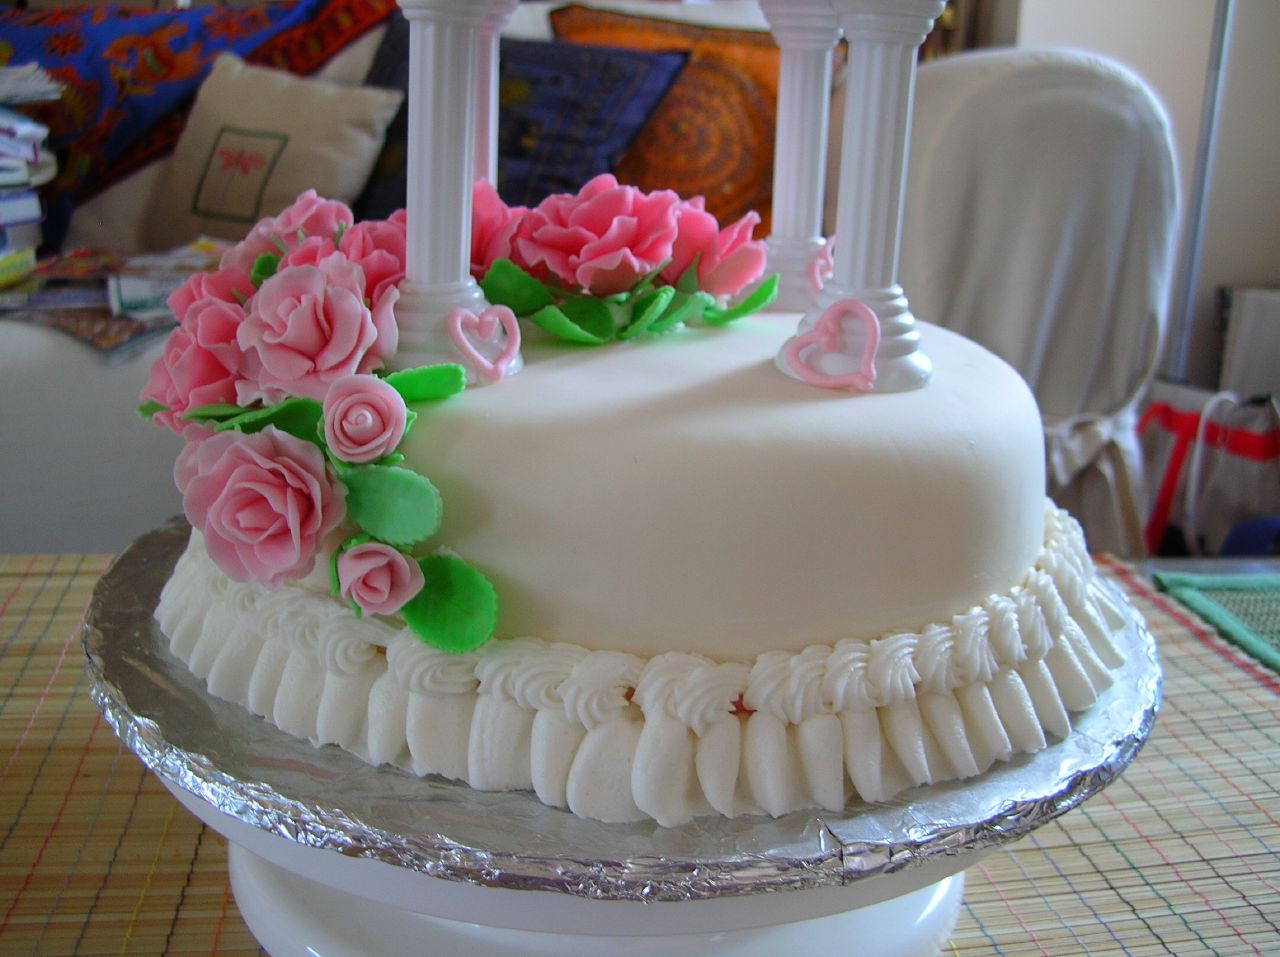 the small white cake has pink roses on it